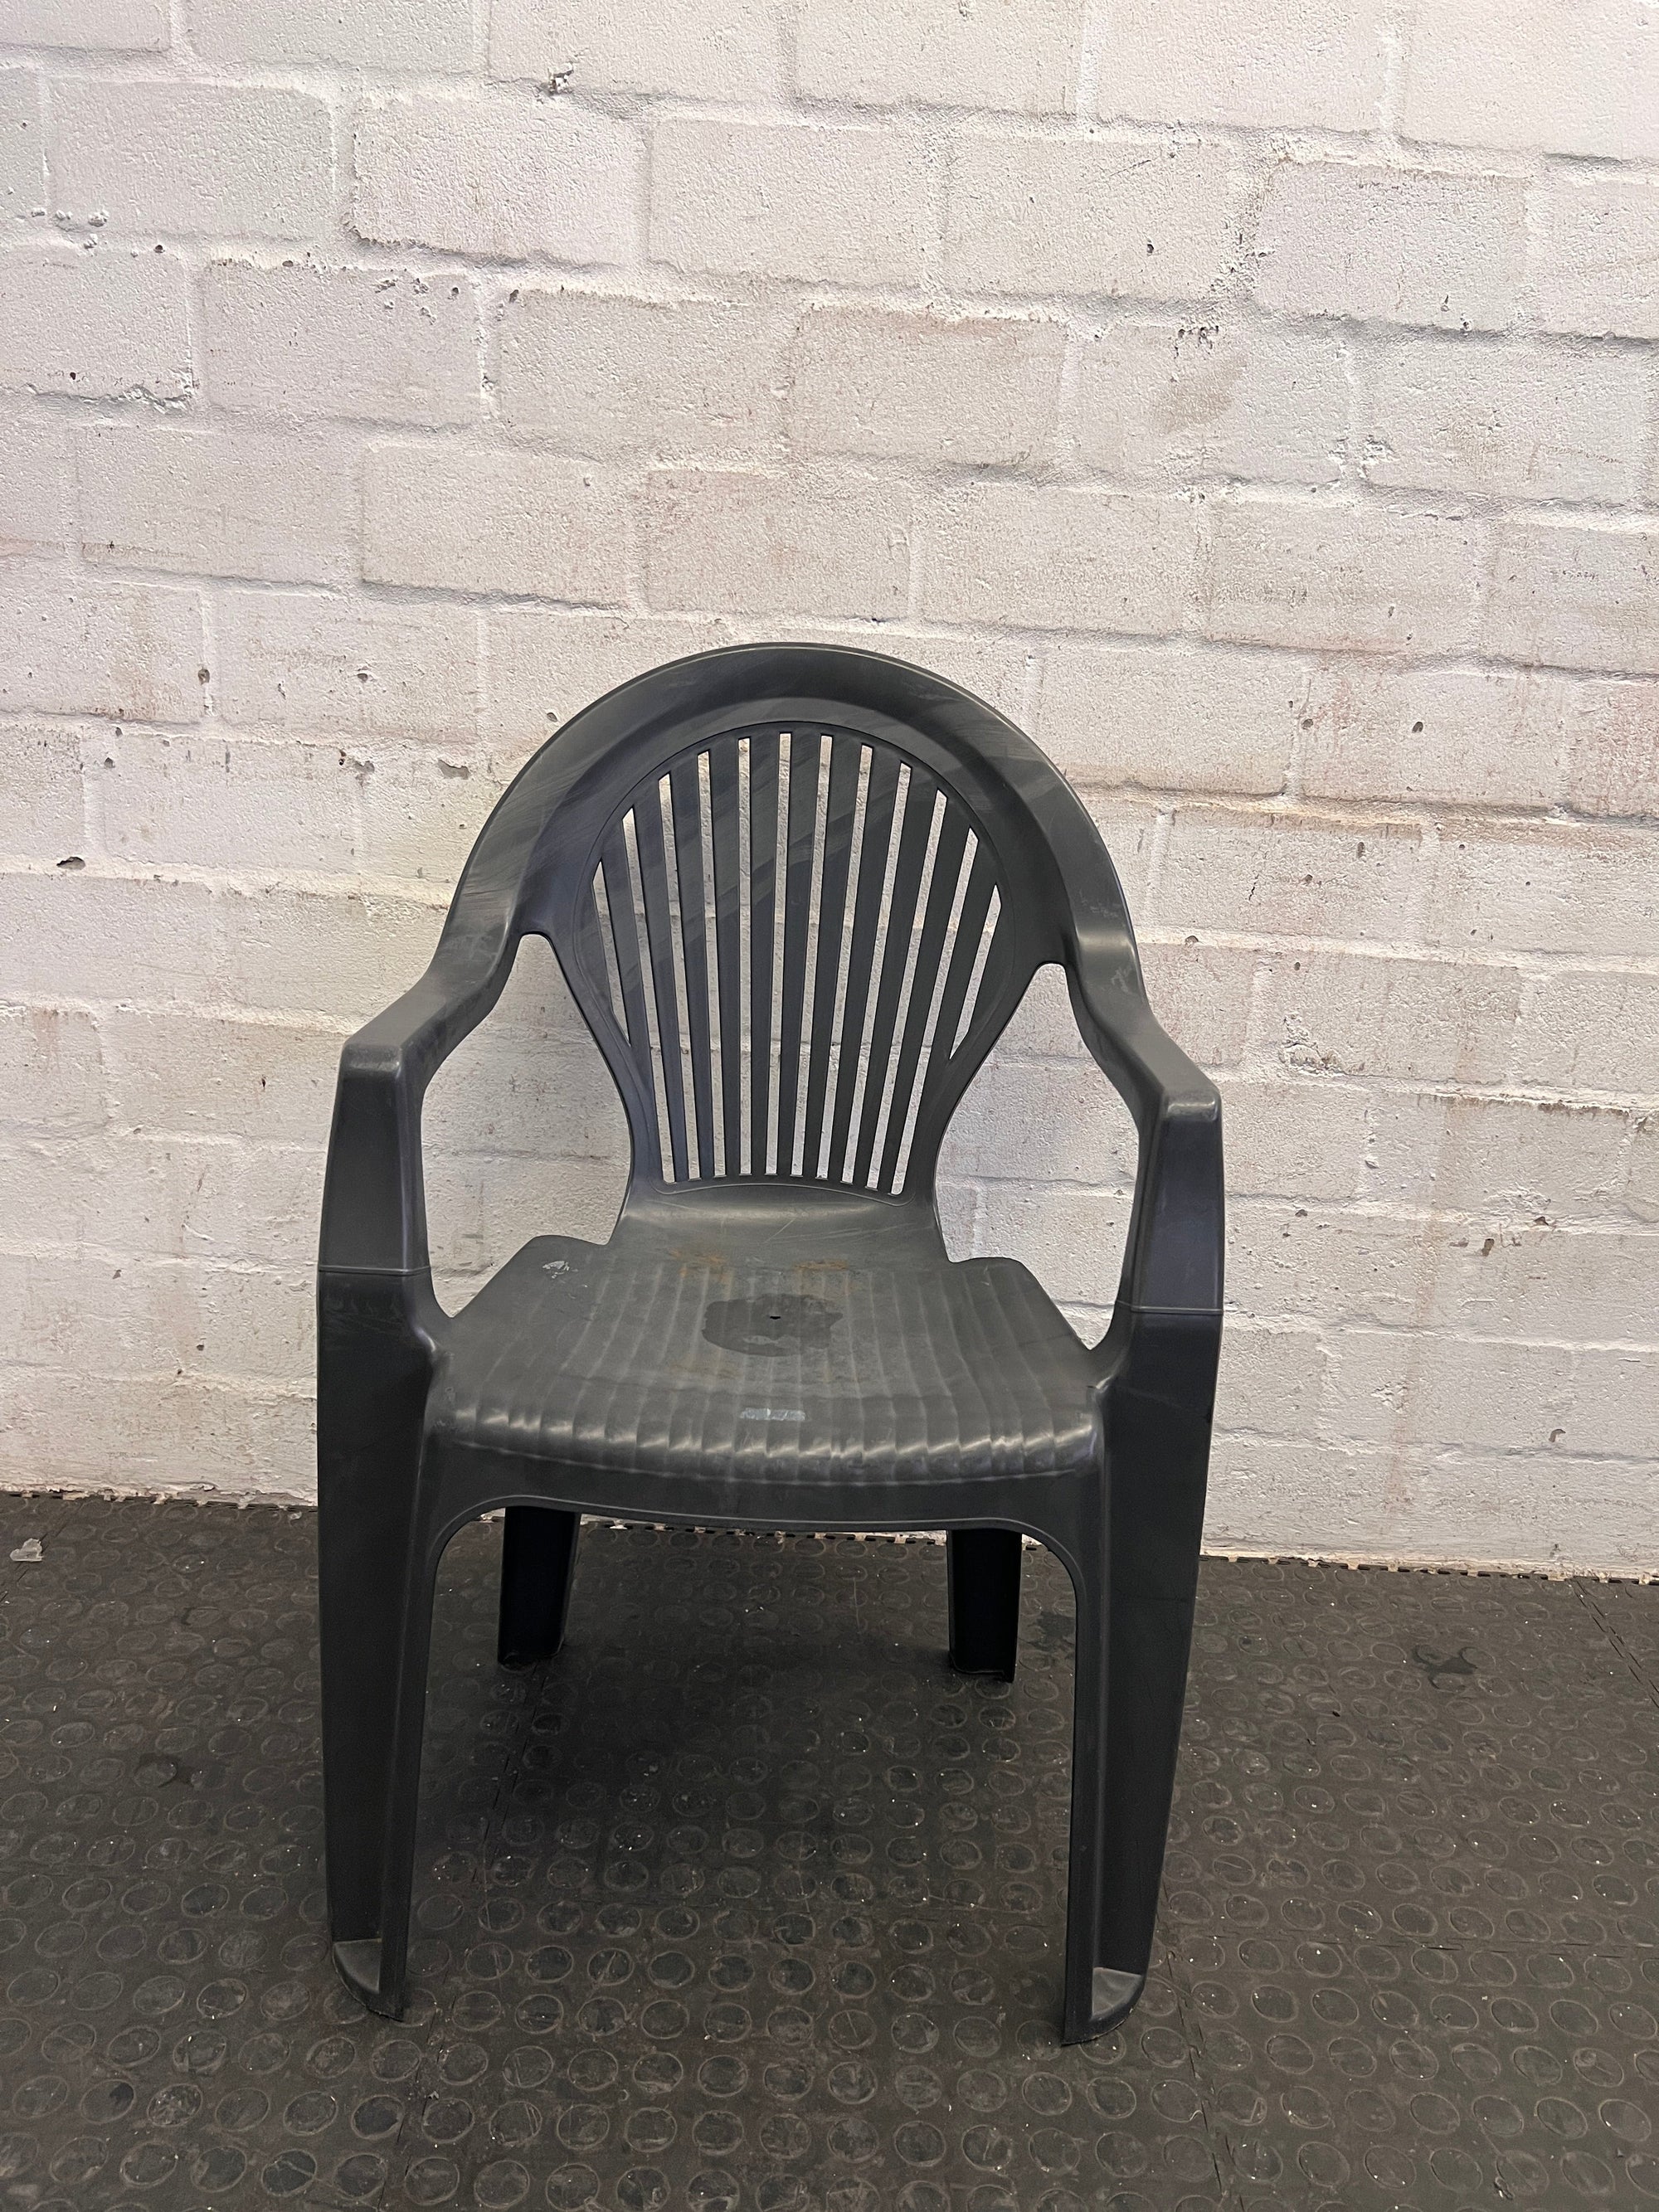 Black Plastic Ribbed Outdoor Chair